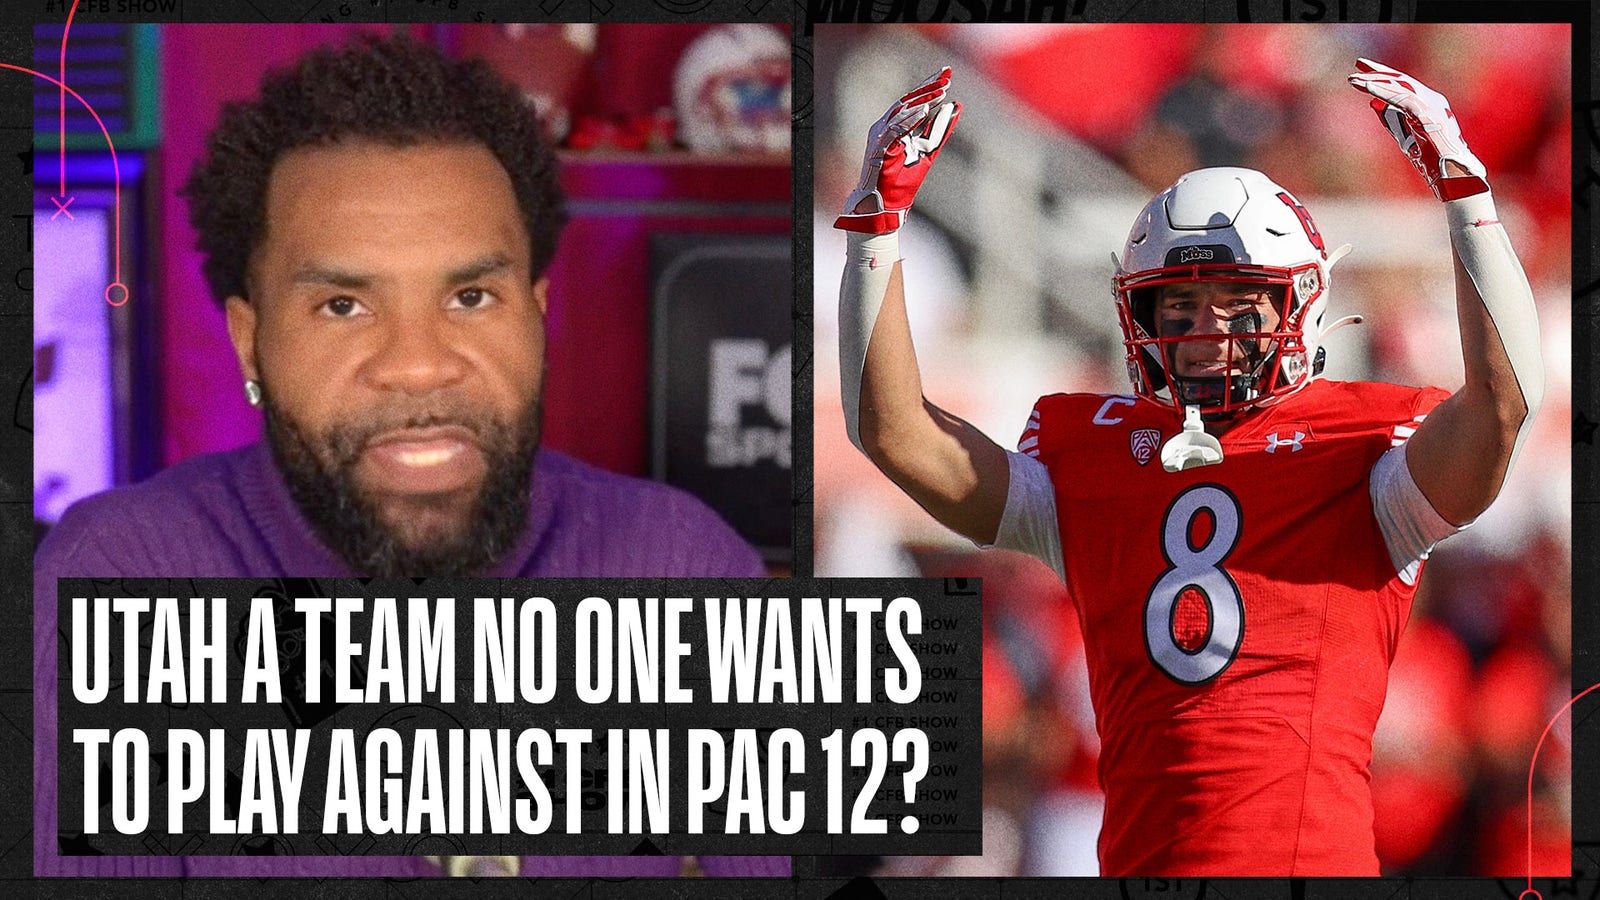 Utah is the team nobody should want to play